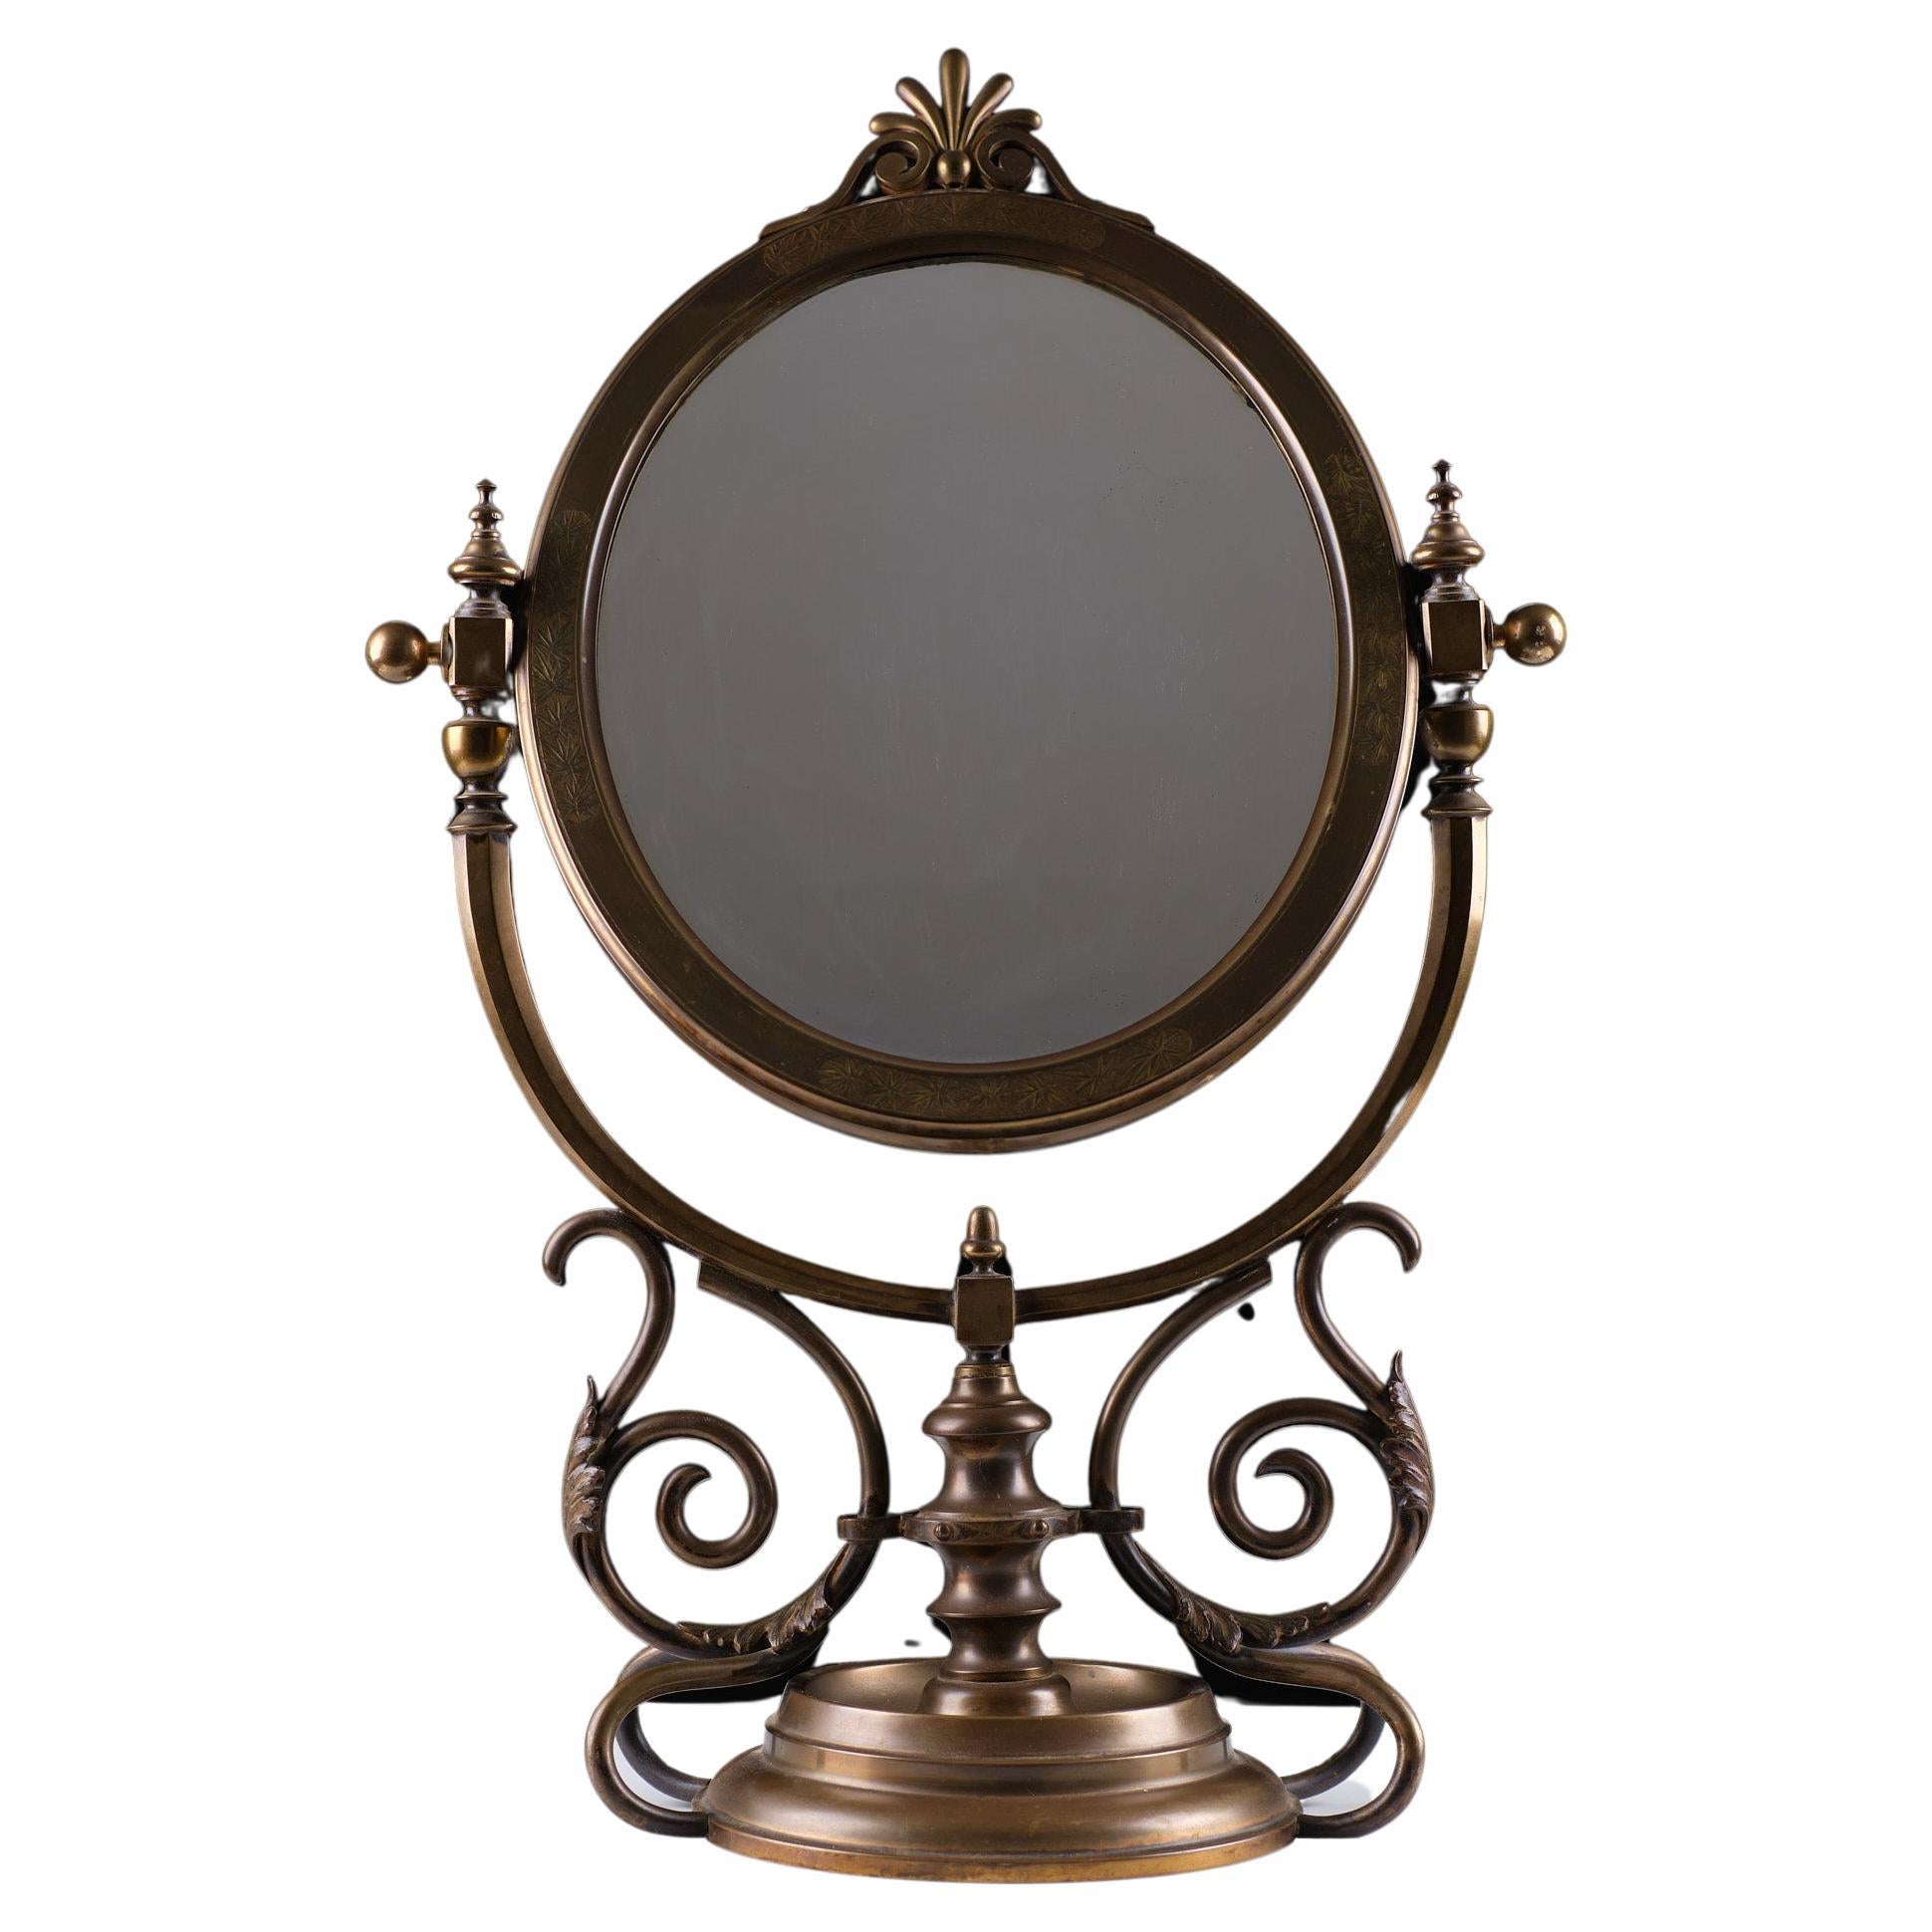 Large brass Victorian tilting table mirror. Great looking piece.
Still complete and working.